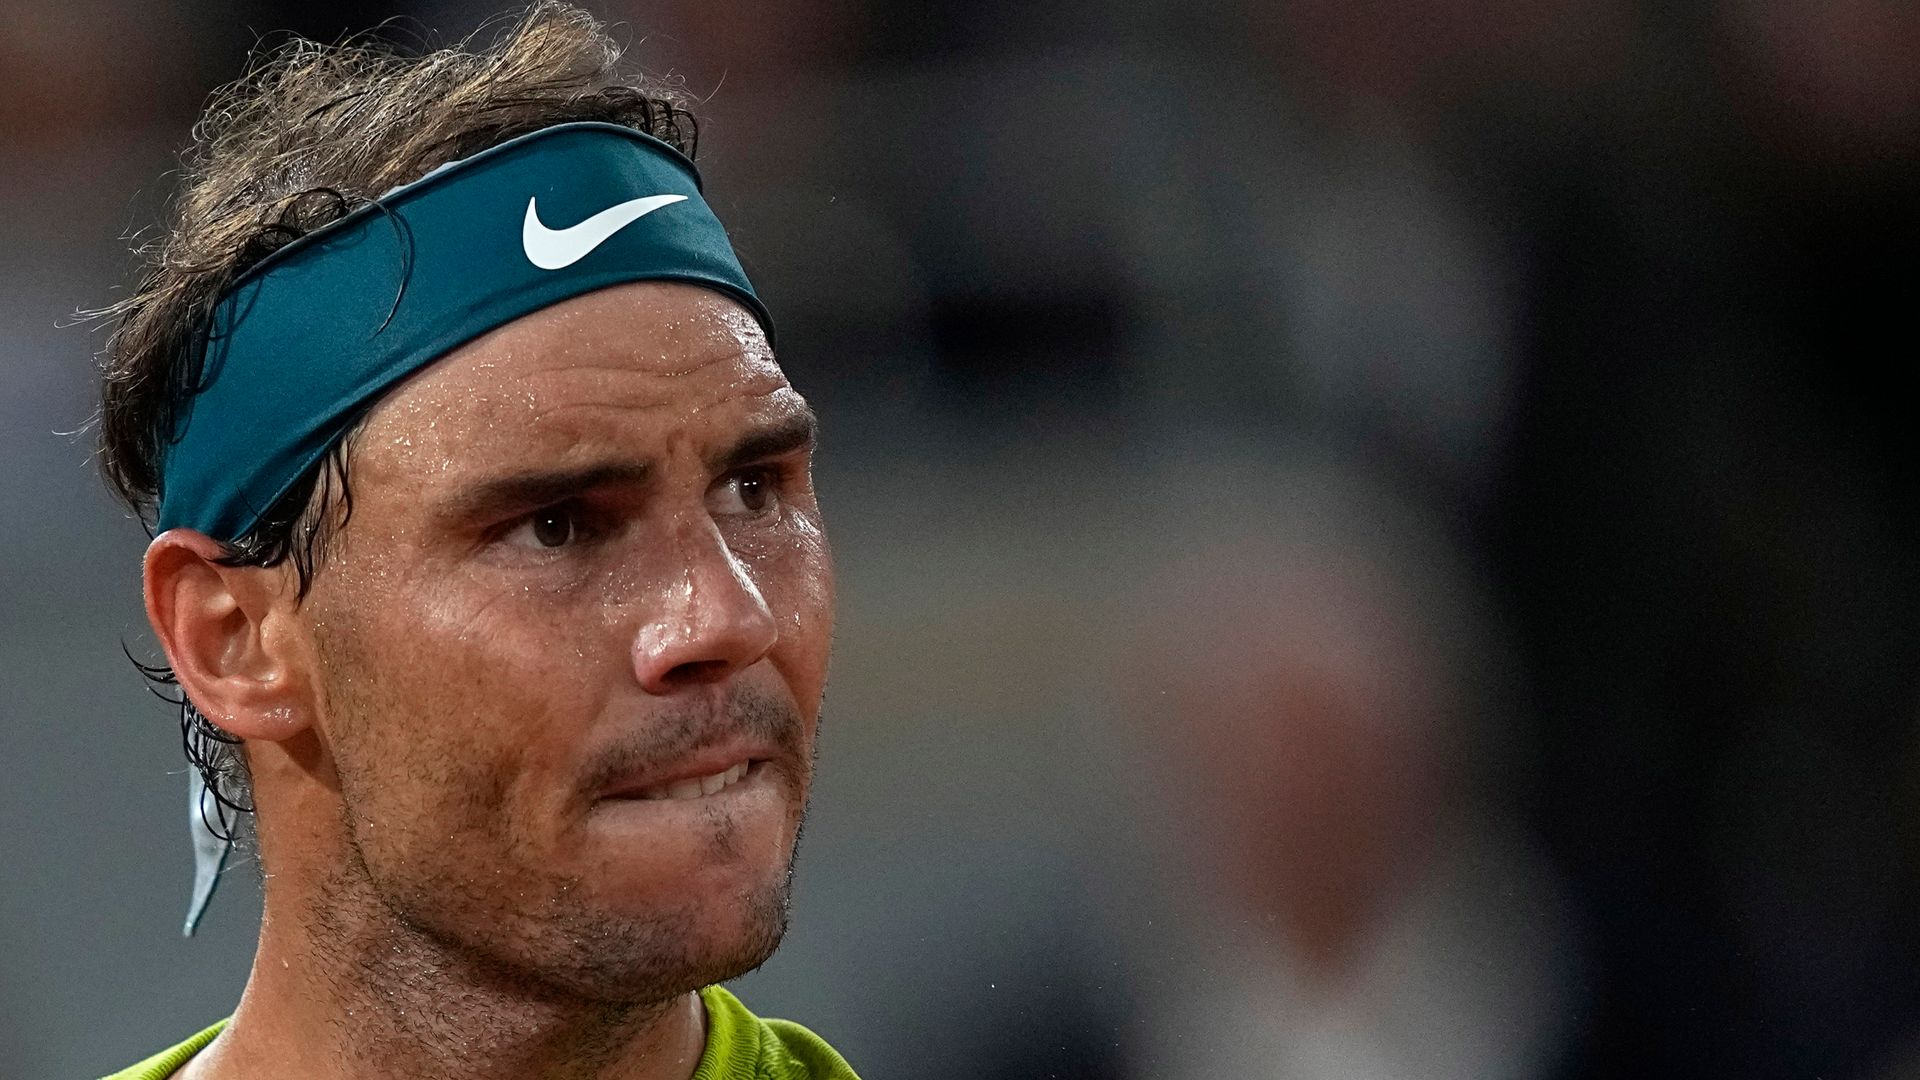 nadal-through-to-french-open-final-after-zverev-injury